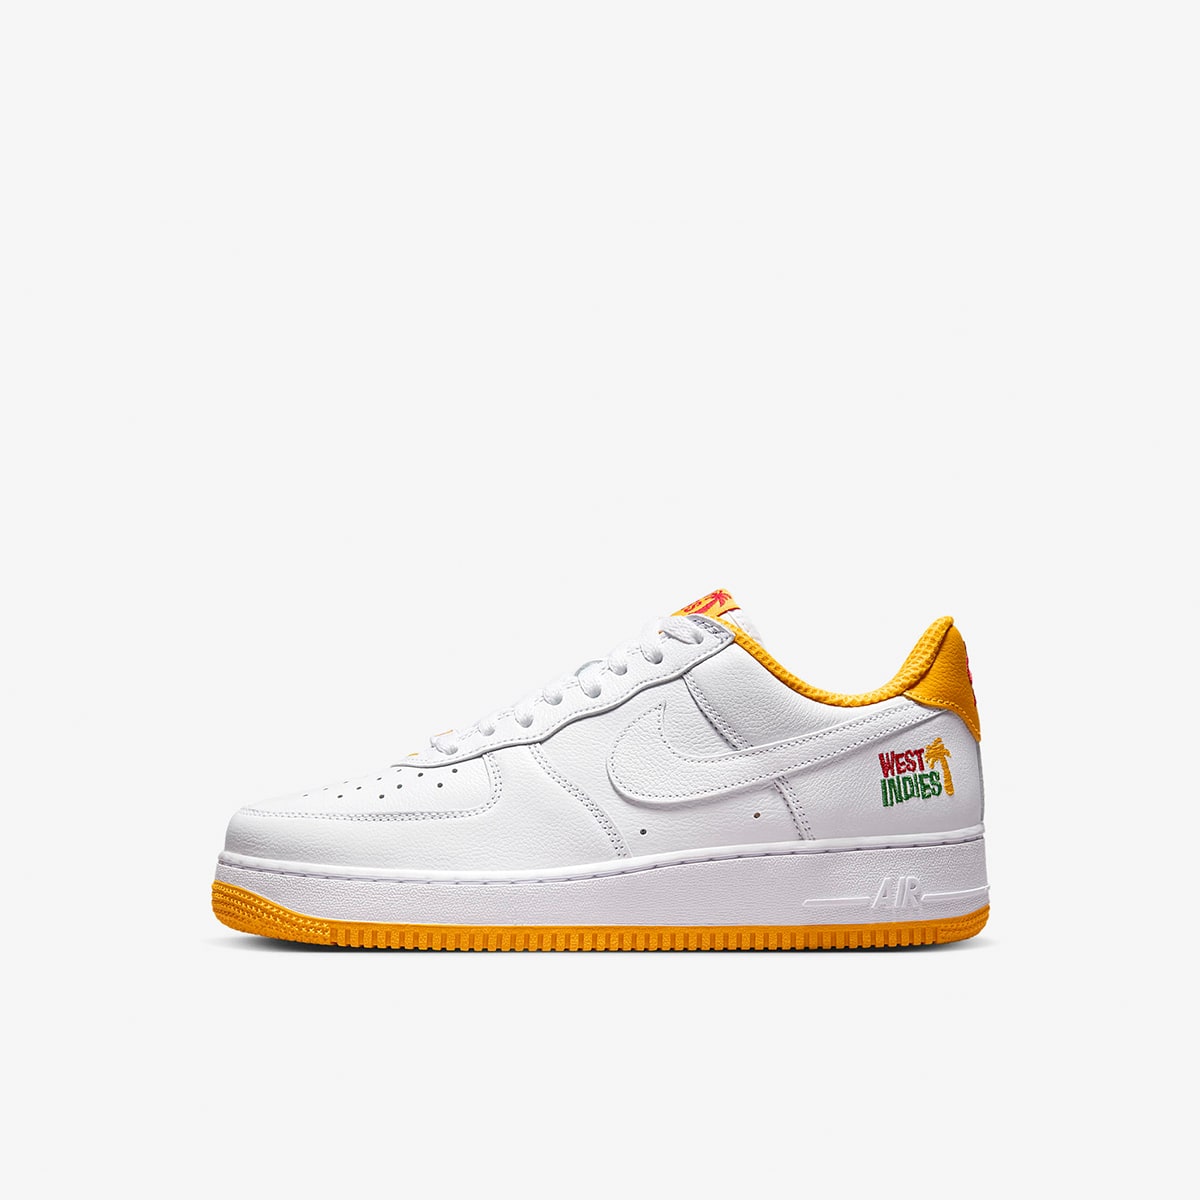 Nike Air Force 1 Low Retro QS (White & Gold) | END. Launches